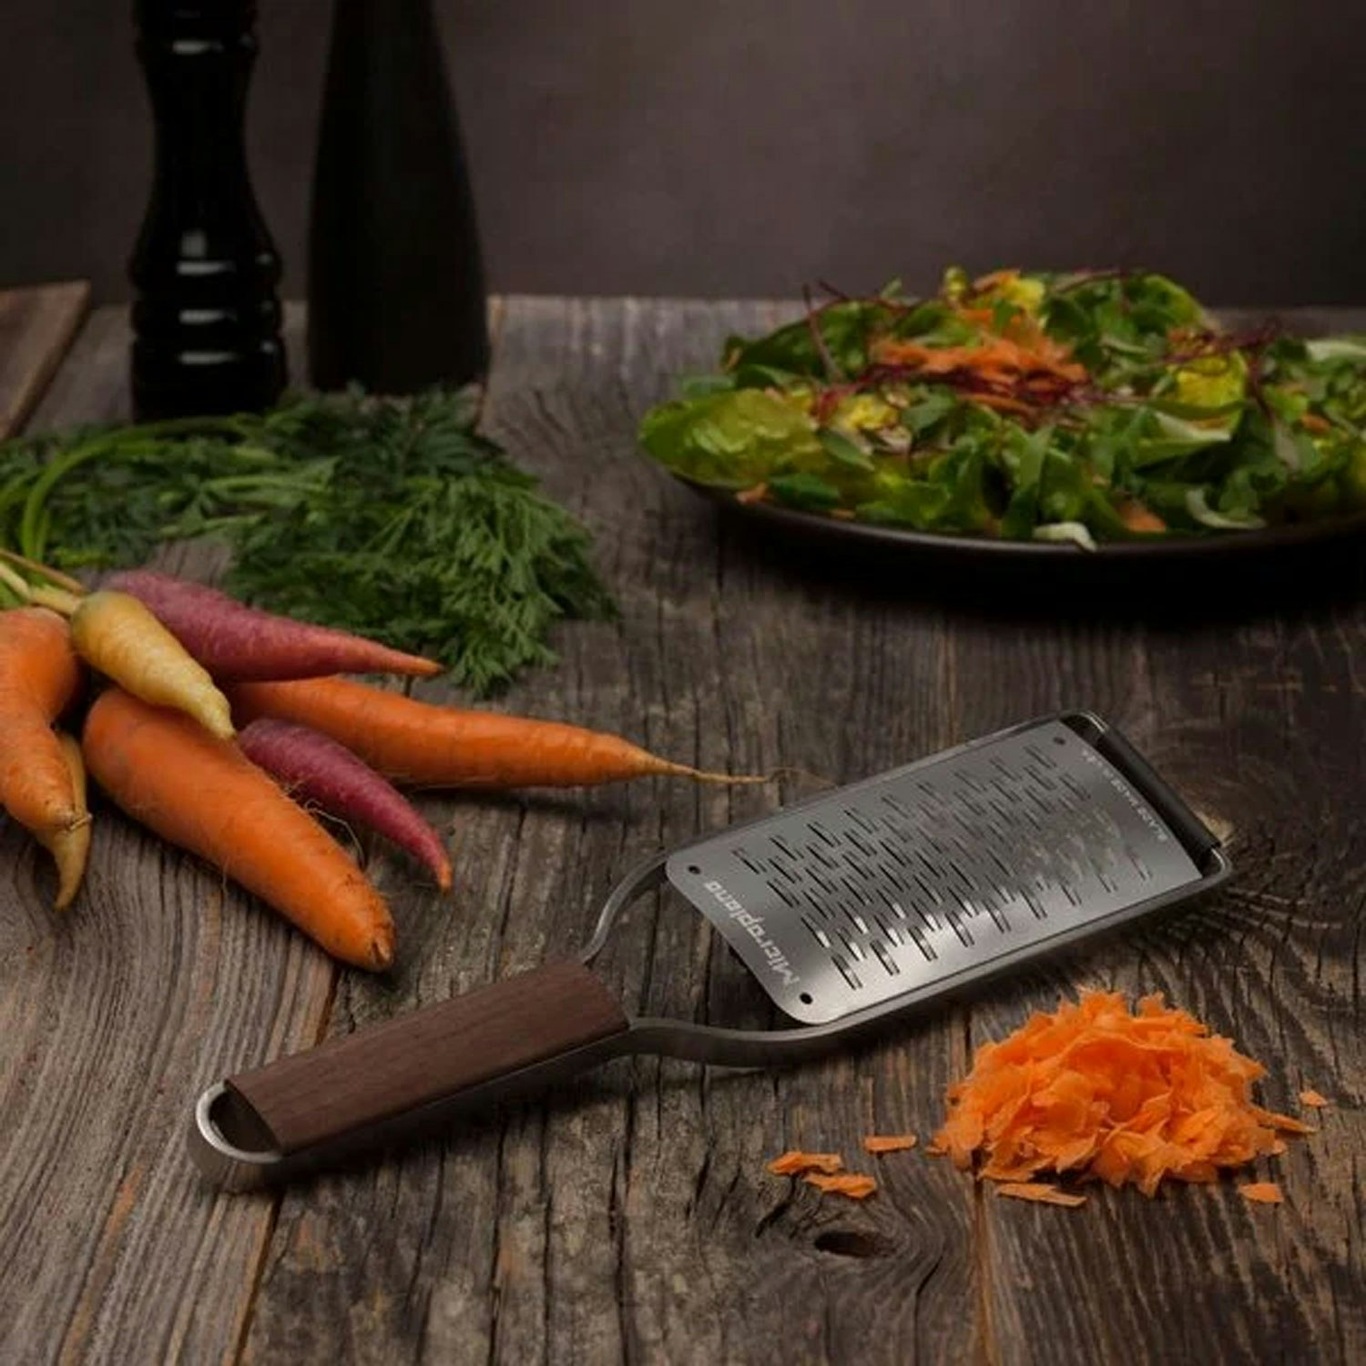 https://royaldesign.com/image/2/microplane-master-gift-set-grater-3-pieces-1?w=800&quality=80